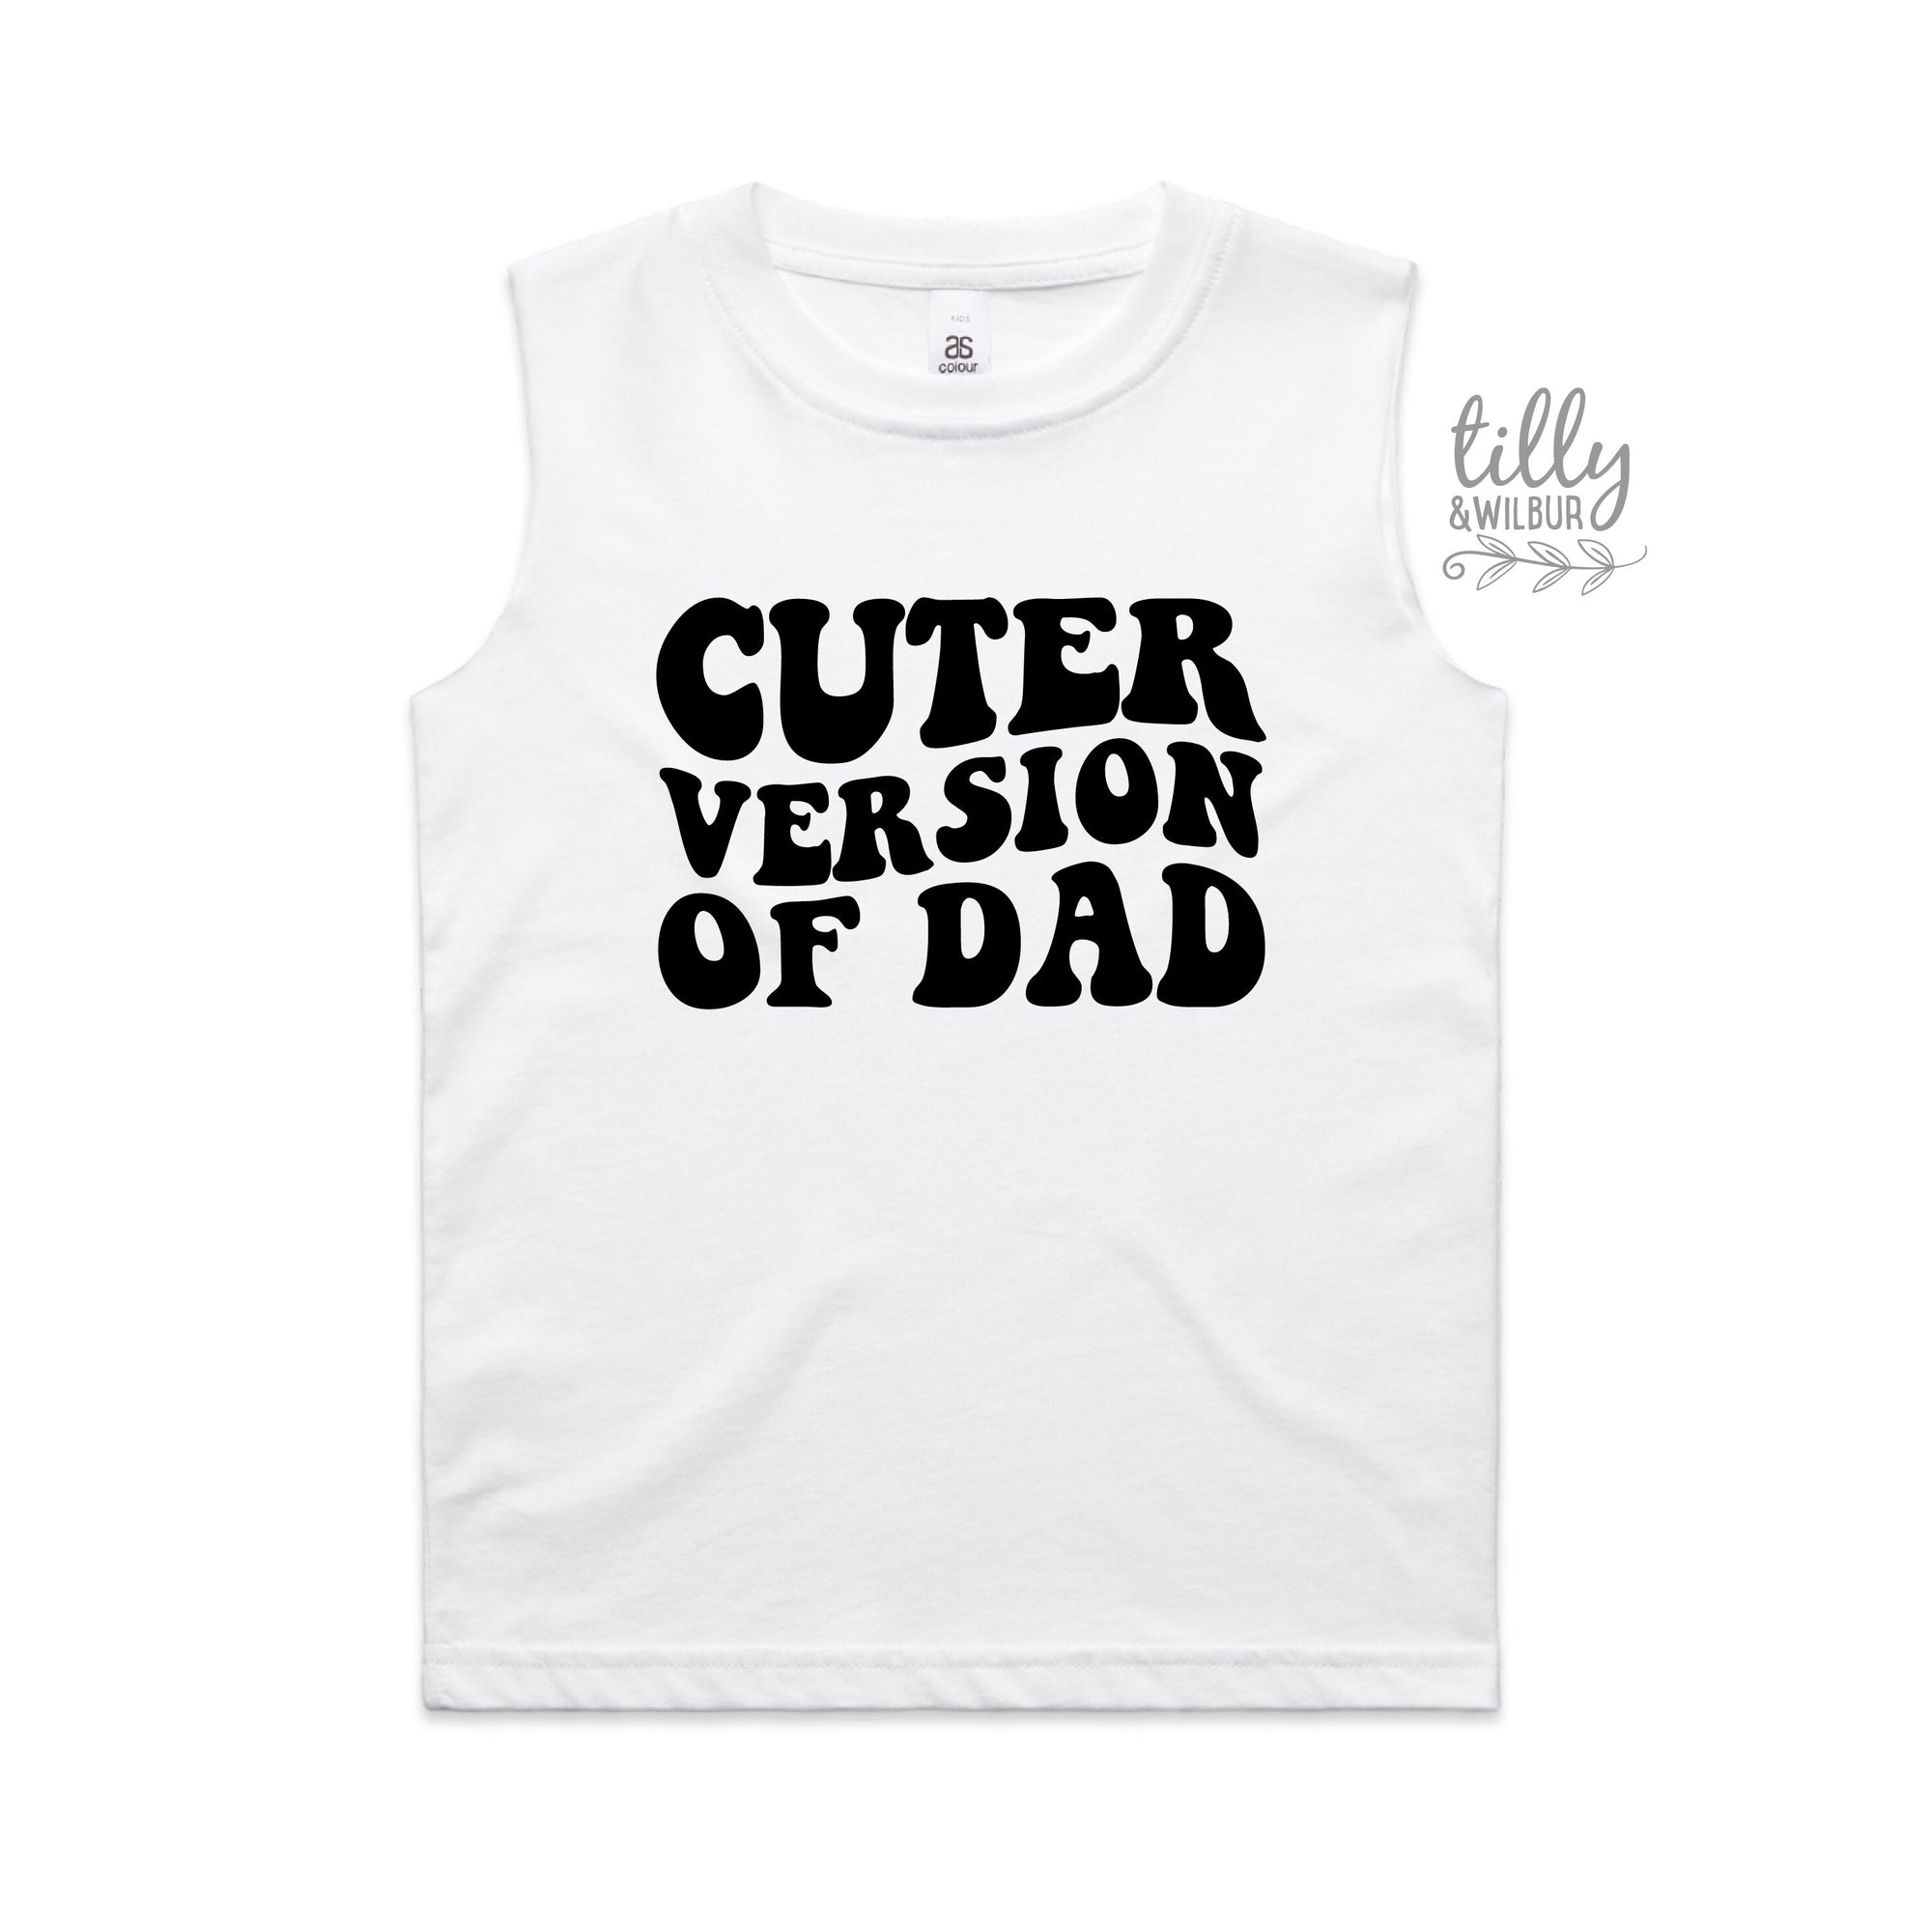 Cuter Version of Dad, Father's Day Singlet Tank, Kids Outfit, Fathers Day Gift, Funny Dad, Kid's clothing, Cute kids, Cuter Than Dad